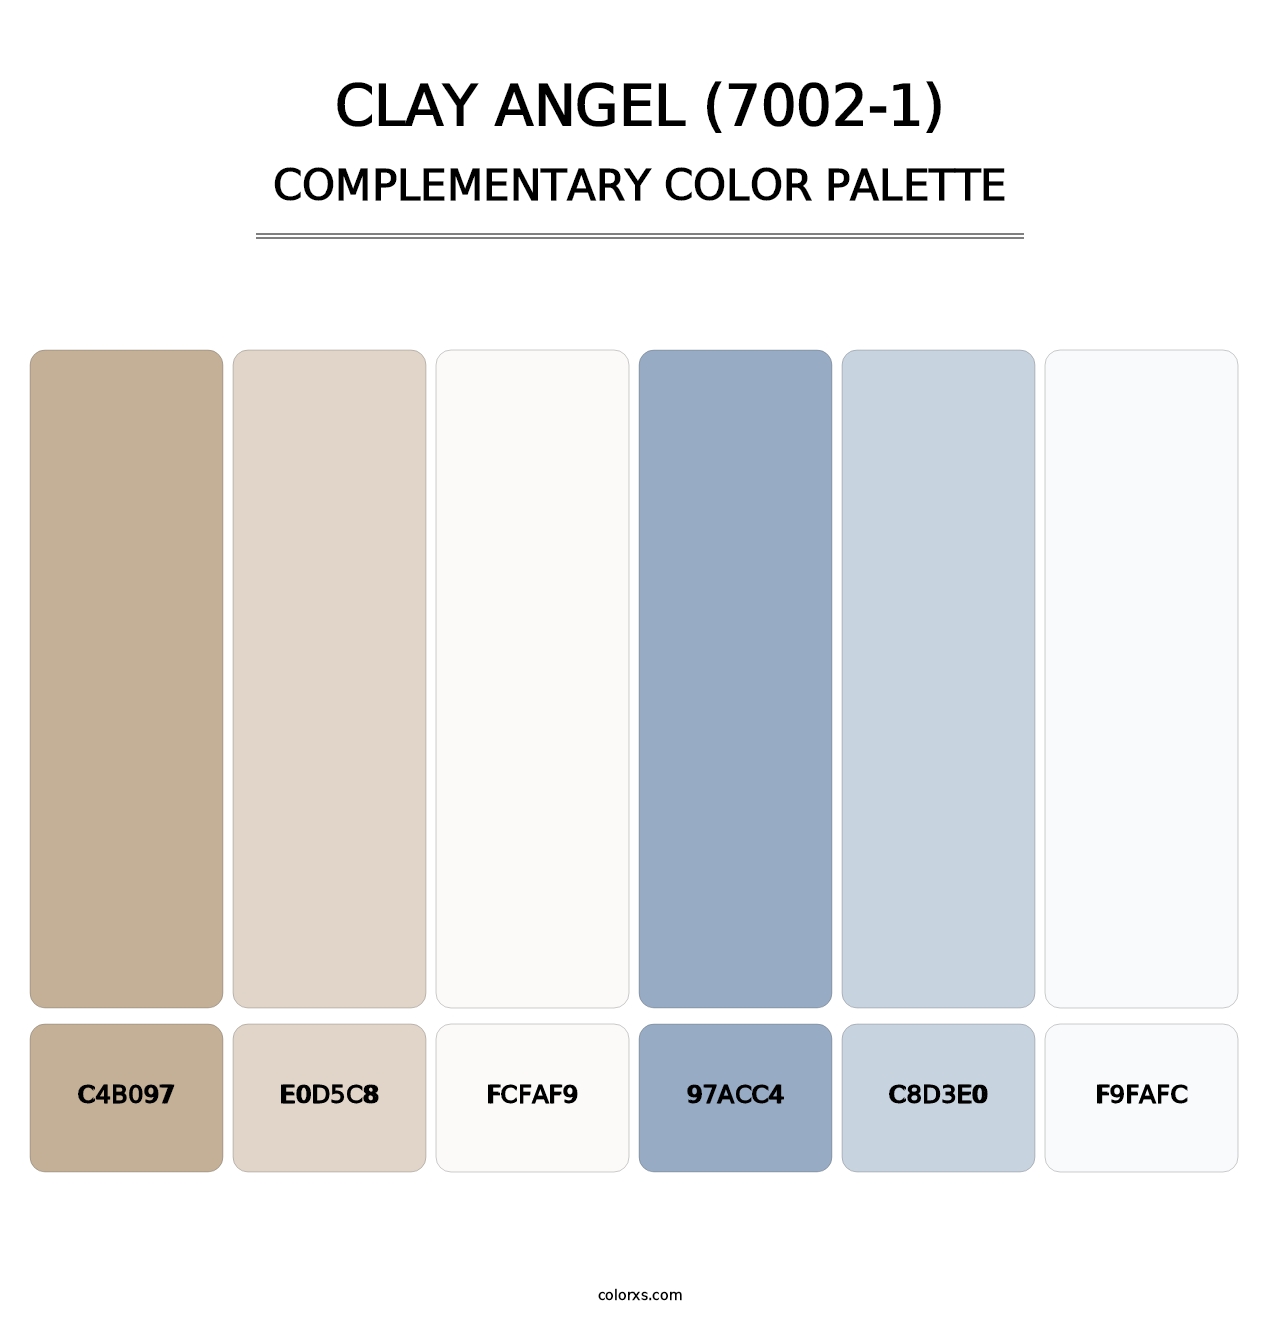 Clay Angel (7002-1) - Complementary Color Palette